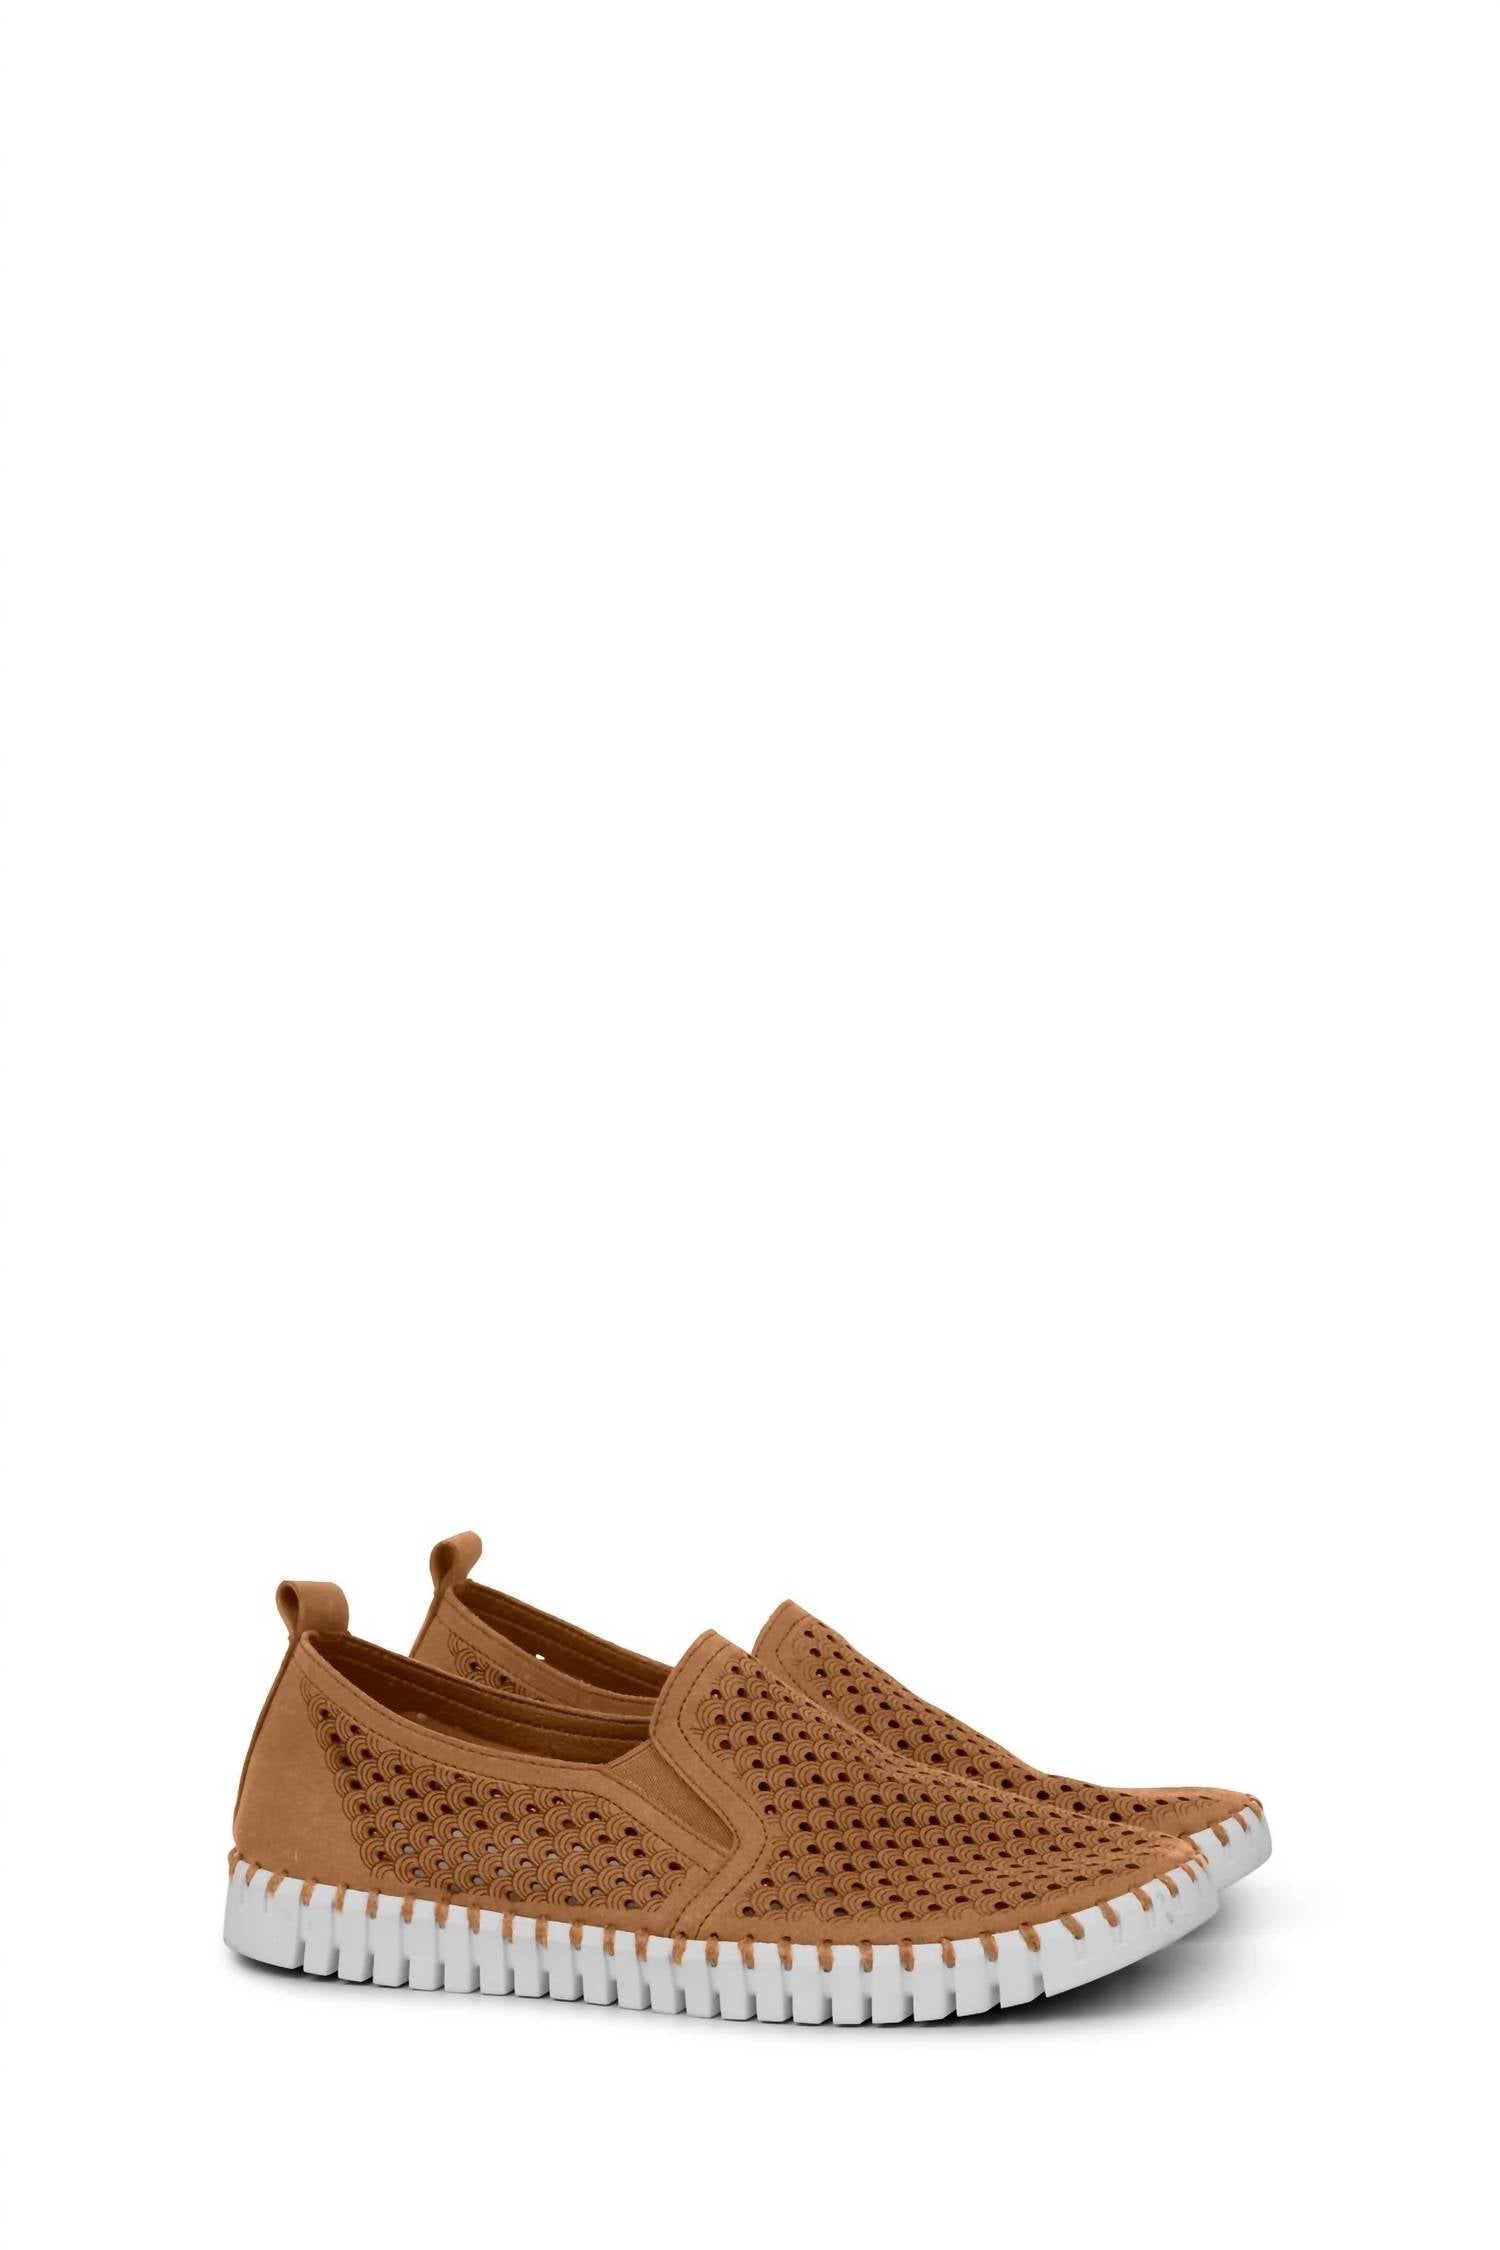 Ilse Jacobsen Women's Just To Know Slip On Shoes In Cashew In Brown